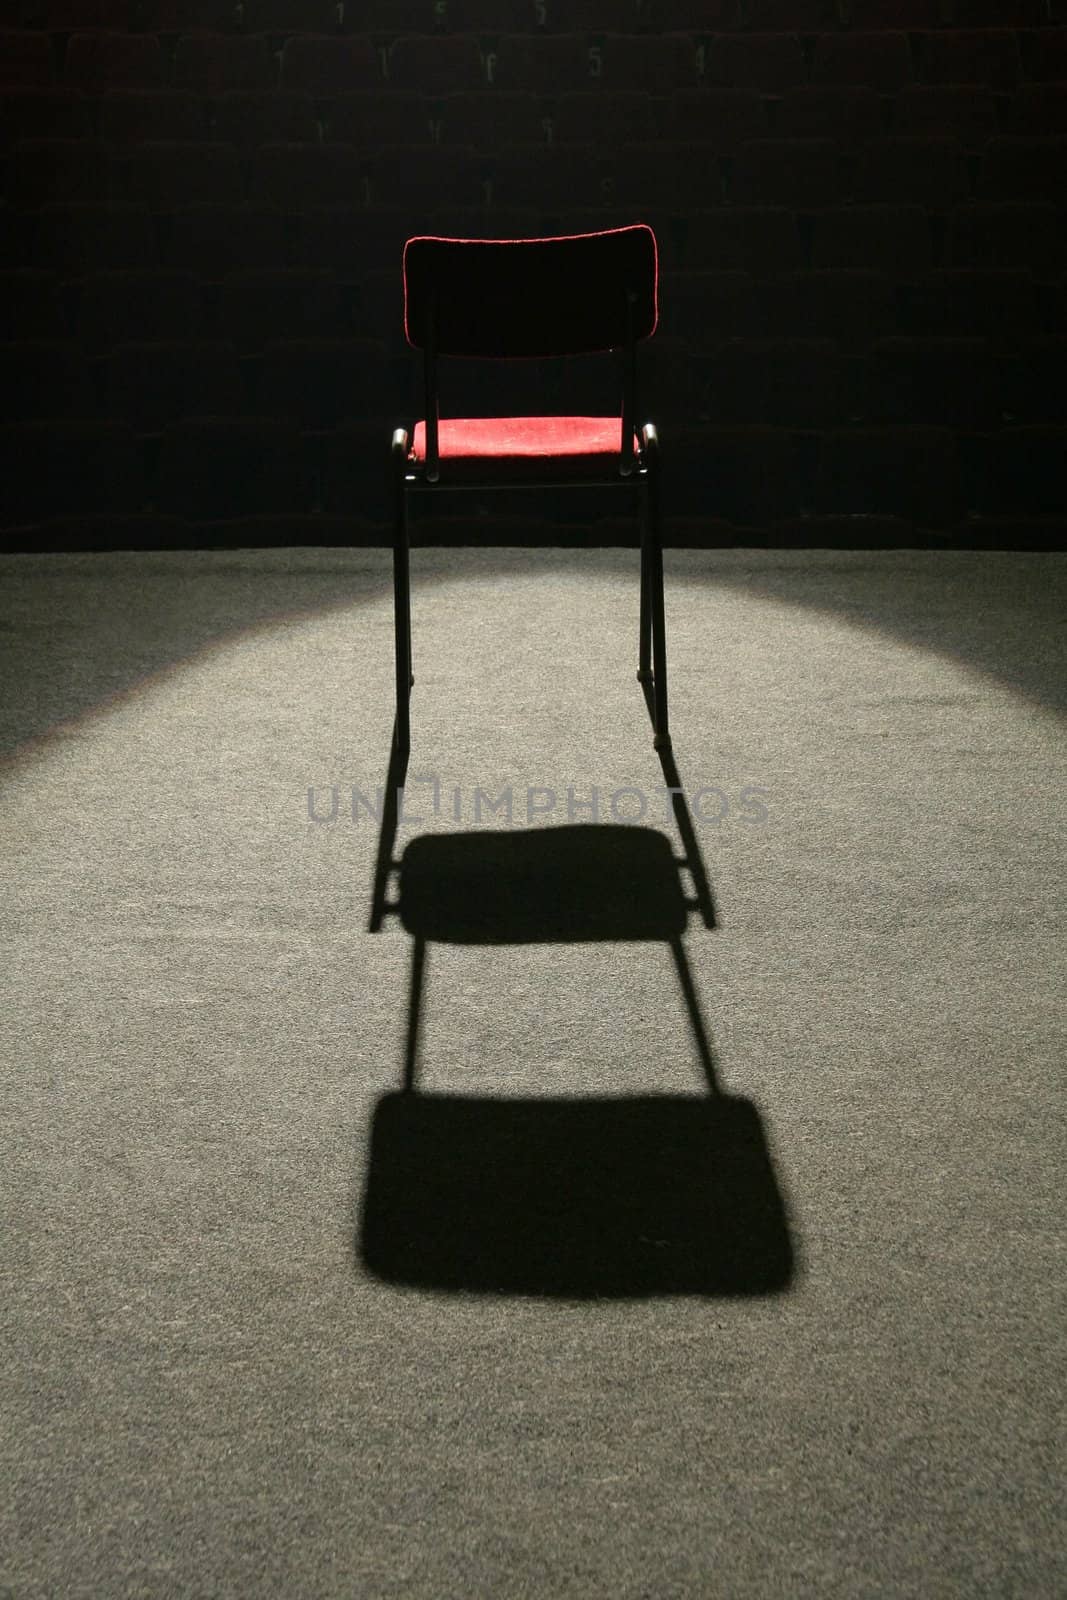 one red chair on stage, lighted with one spot light, empty seats in background